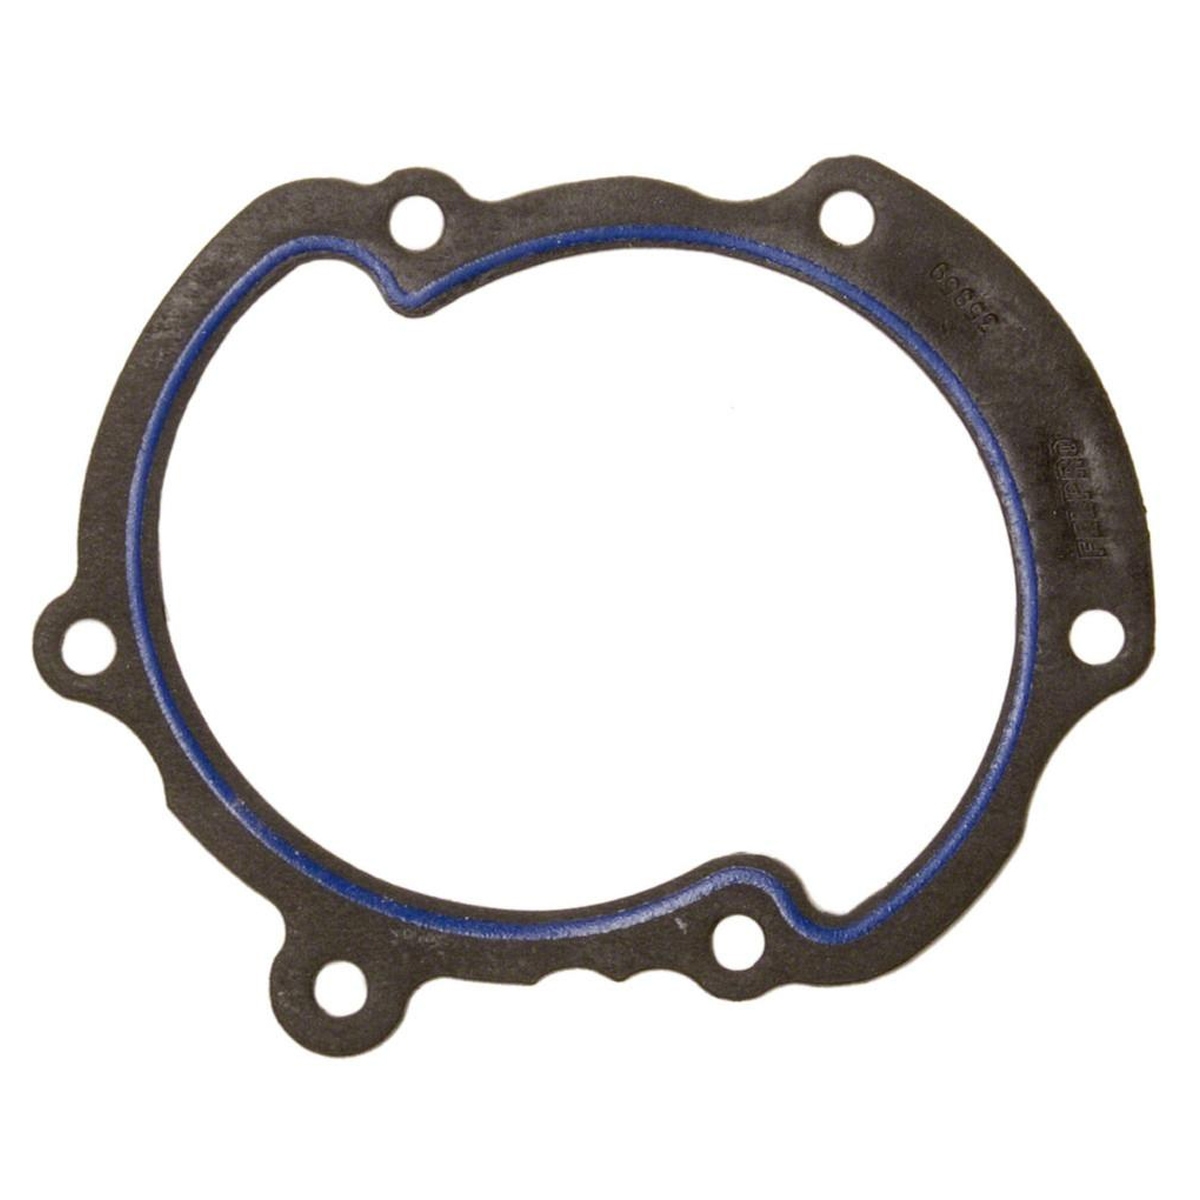 VAUXHALL AND OPEL INSIGNIA Water Pump Gasket